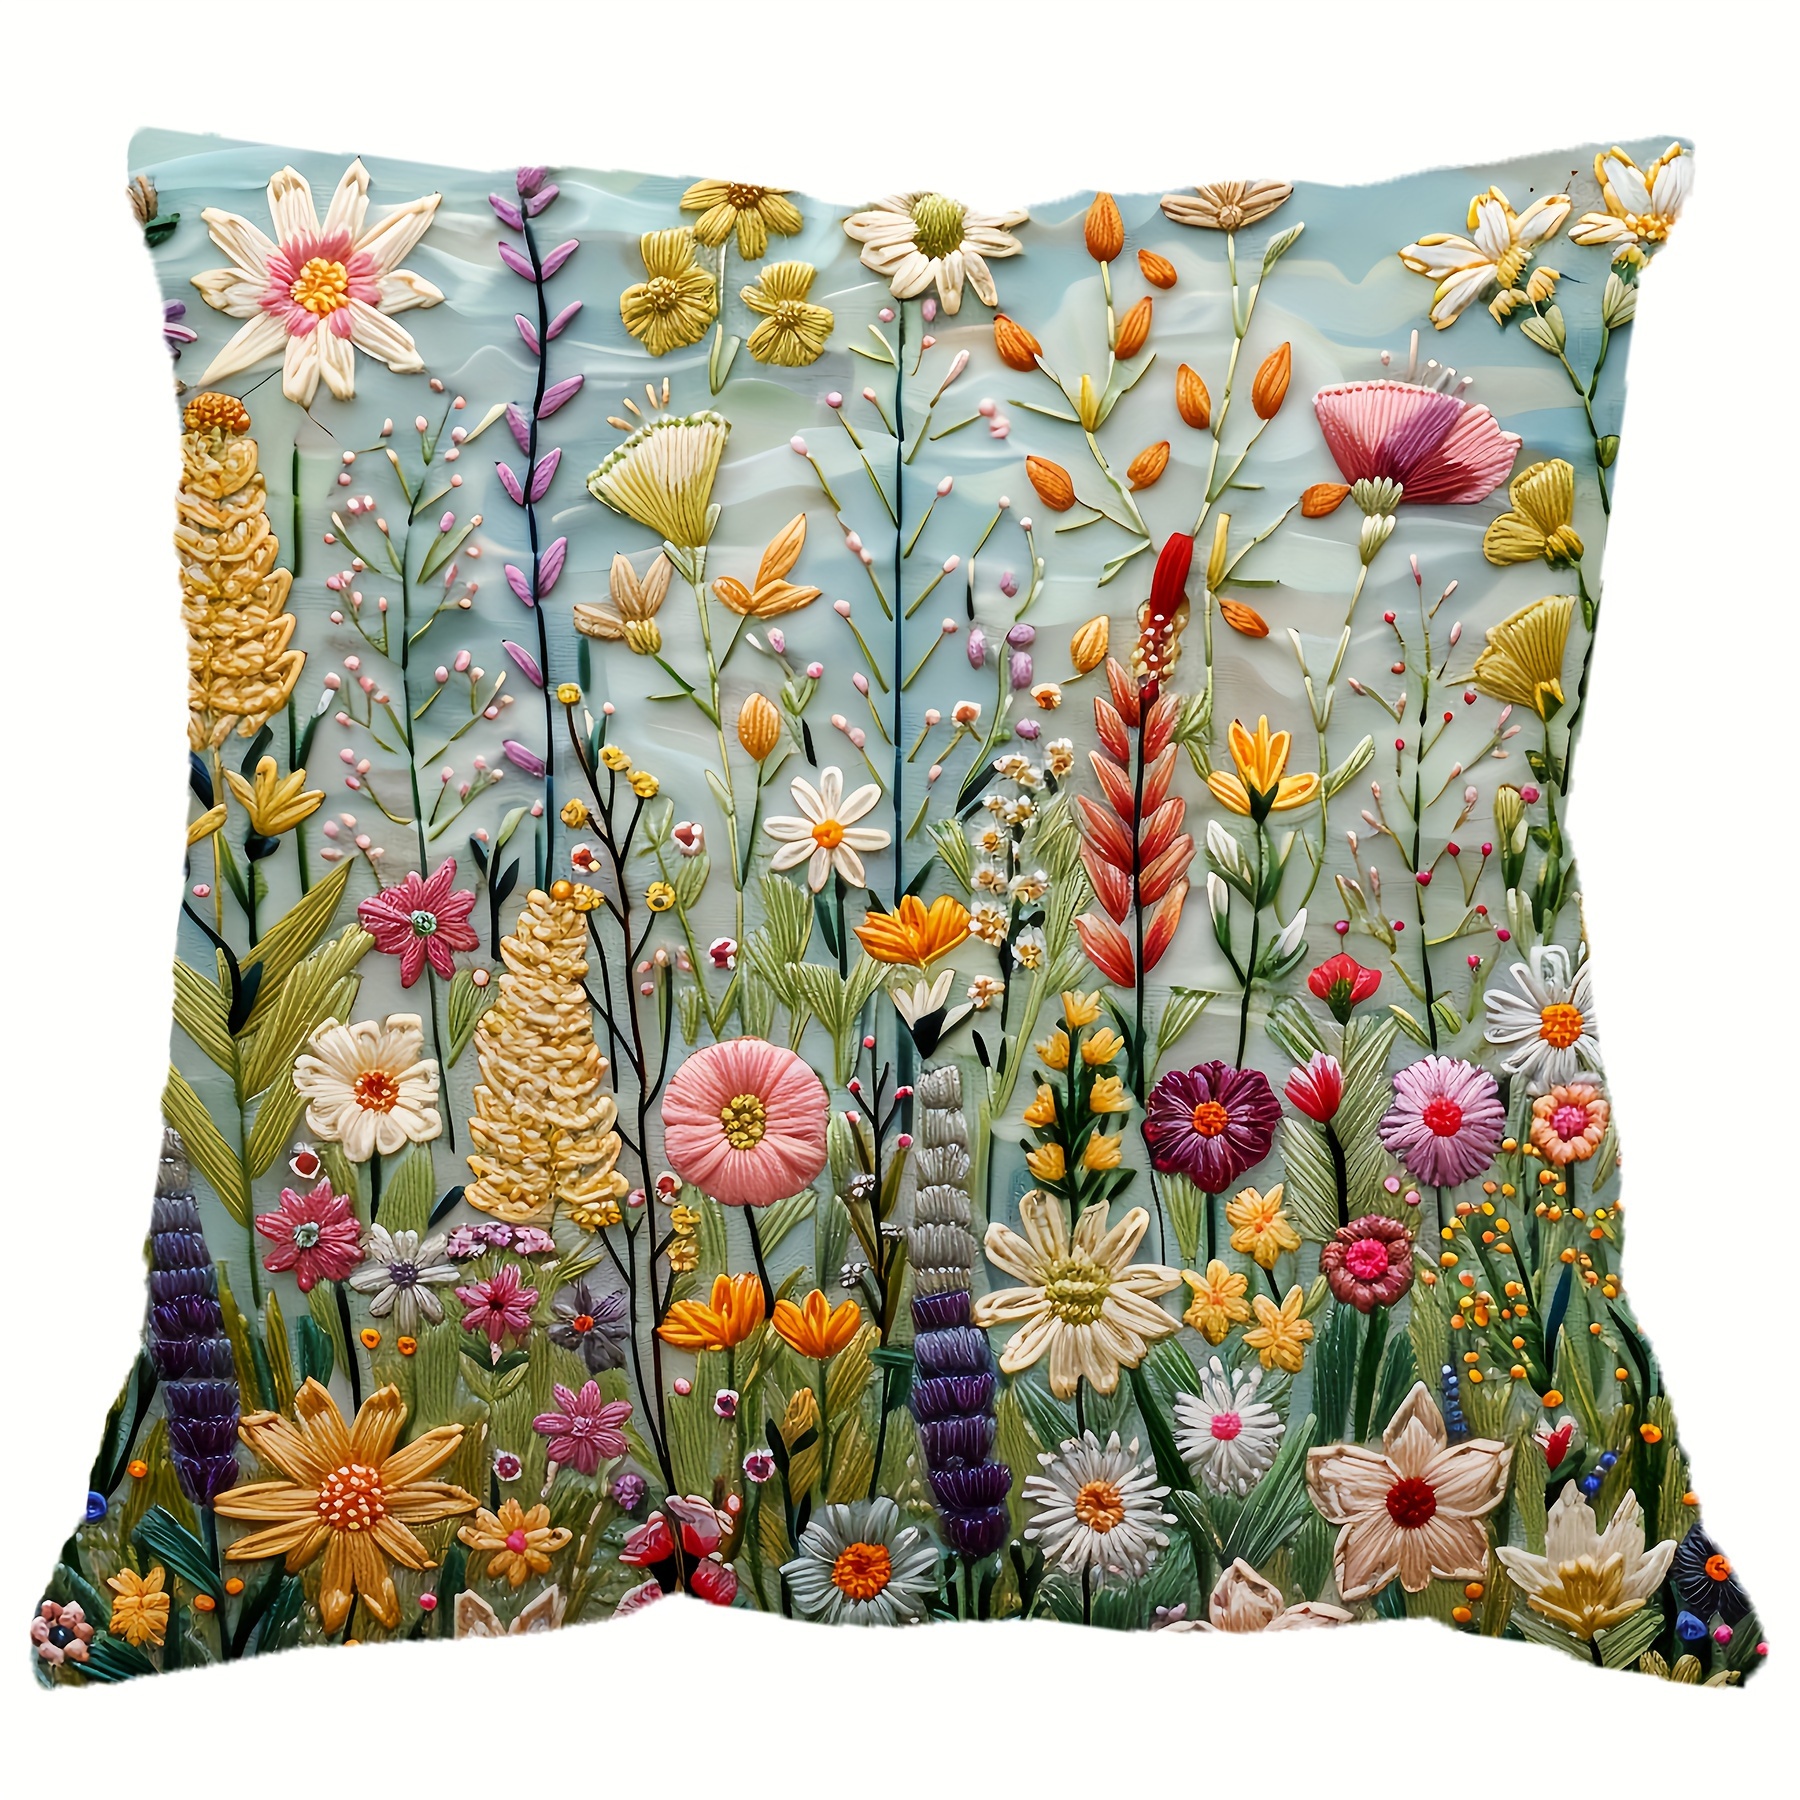 

Contemporary Floral Throw Pillow Cover, 1pc, Super Soft Woven Polyester, Hand Wash, Zipper Closure, Decorative Single-sided Print, 17.7x17.7 Inch, Versatile For Living Room & Bedroom Decor - No Insert